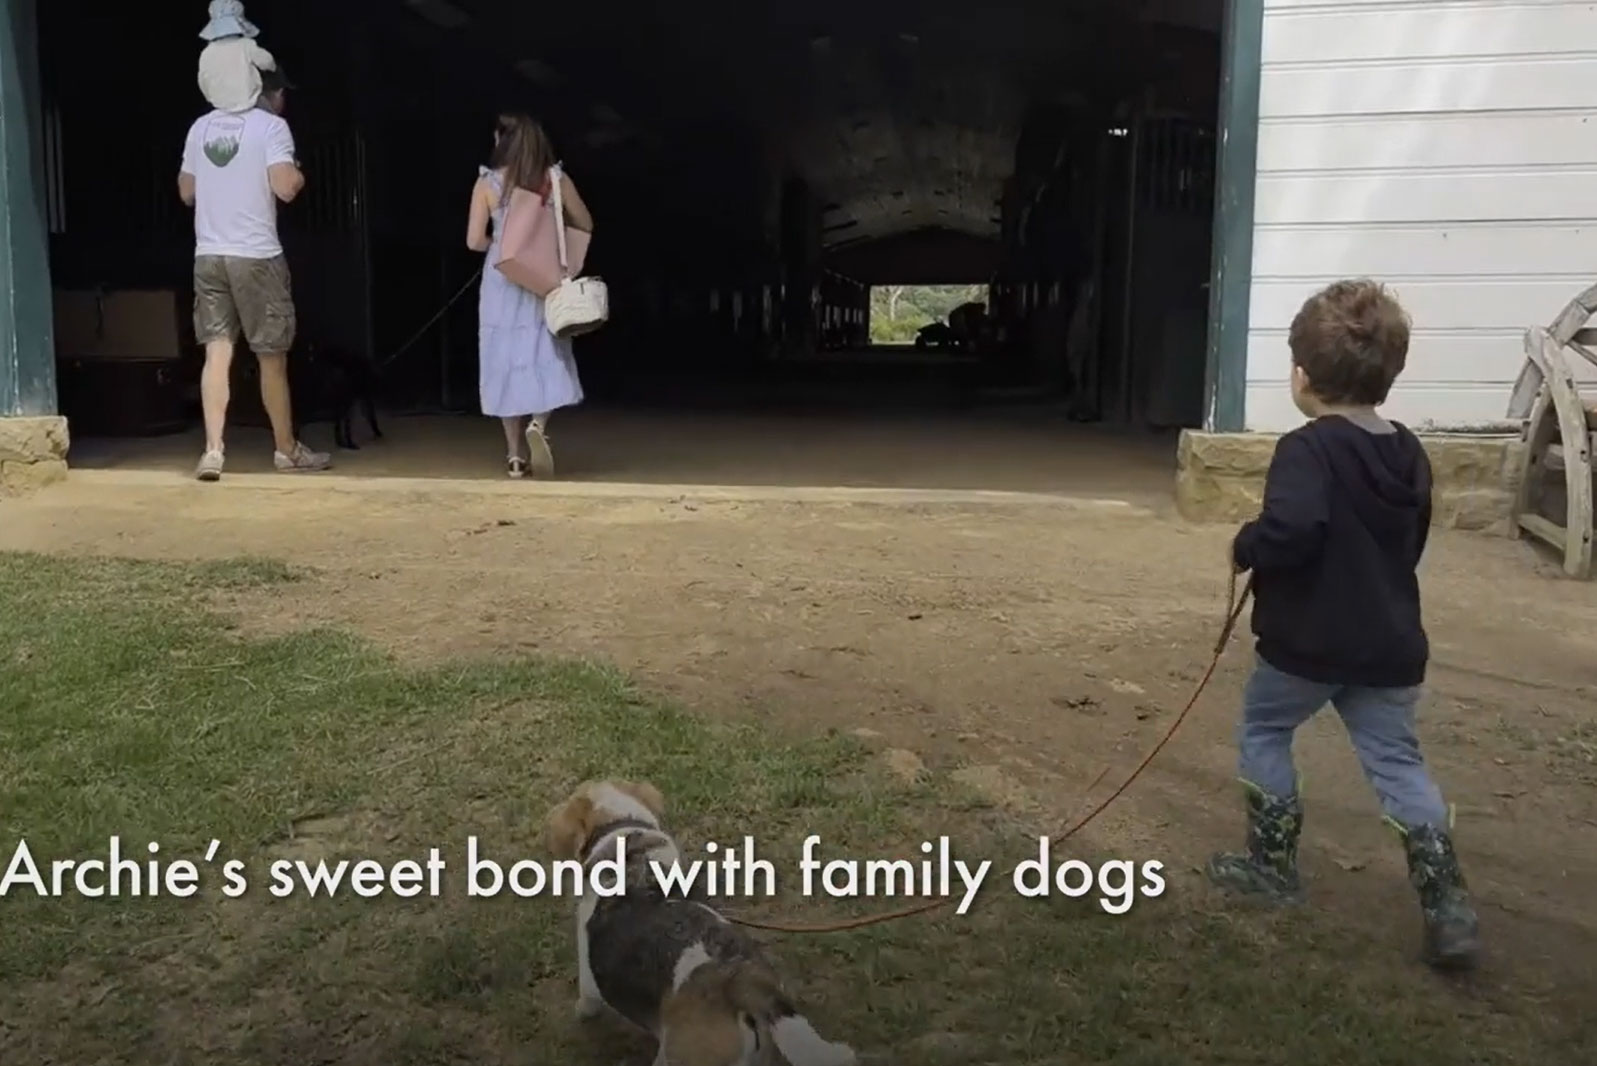 Video: Meghan Markle’s son Archie taped dog walking in homemade video